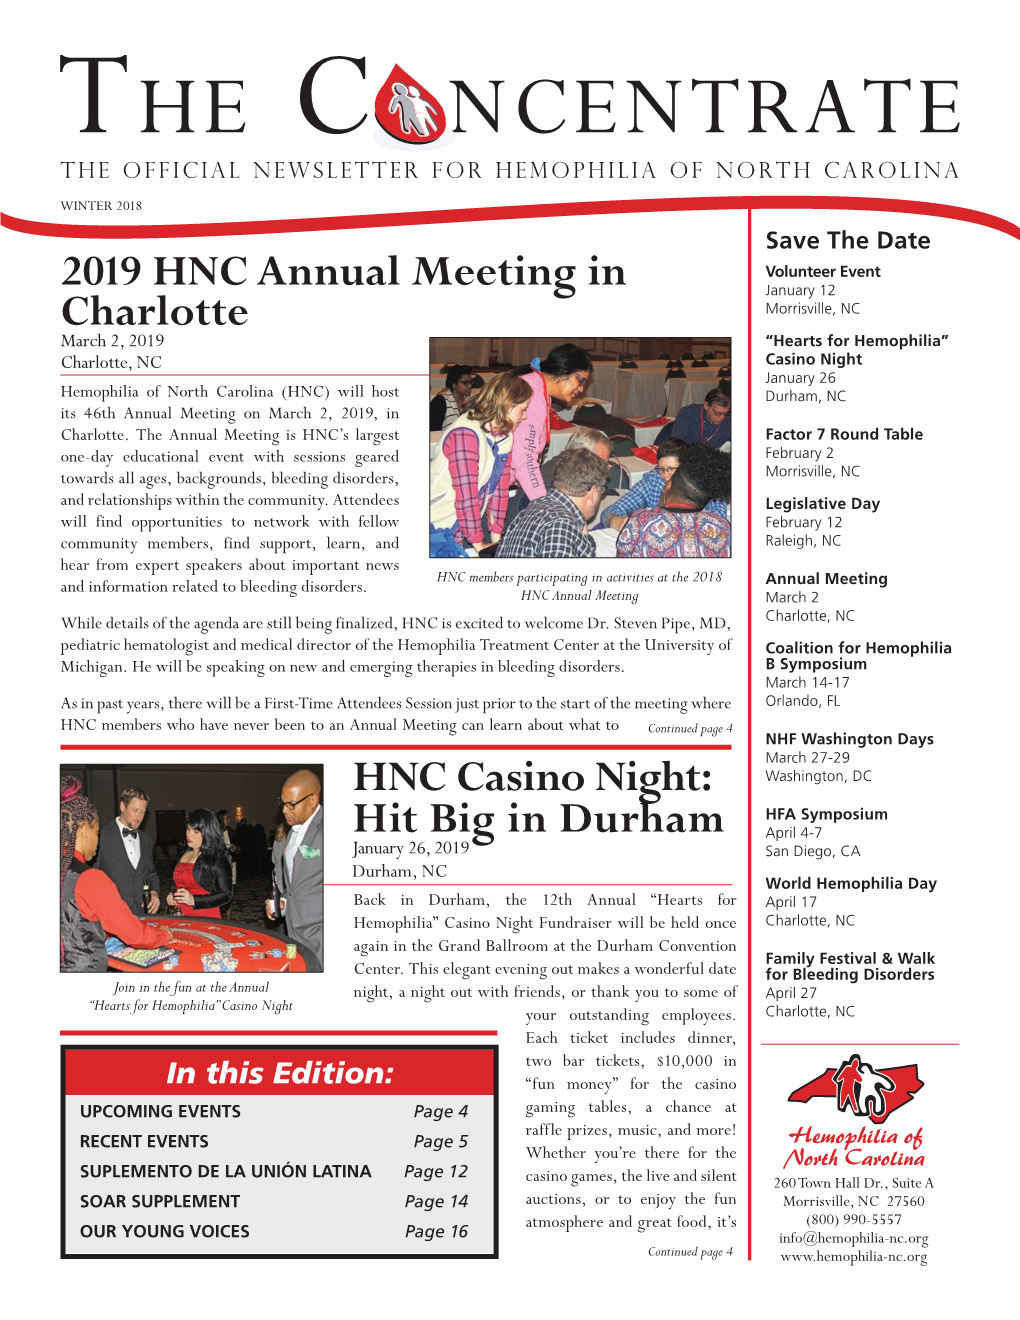 2019 HNC Annual Meeting in Charlotte